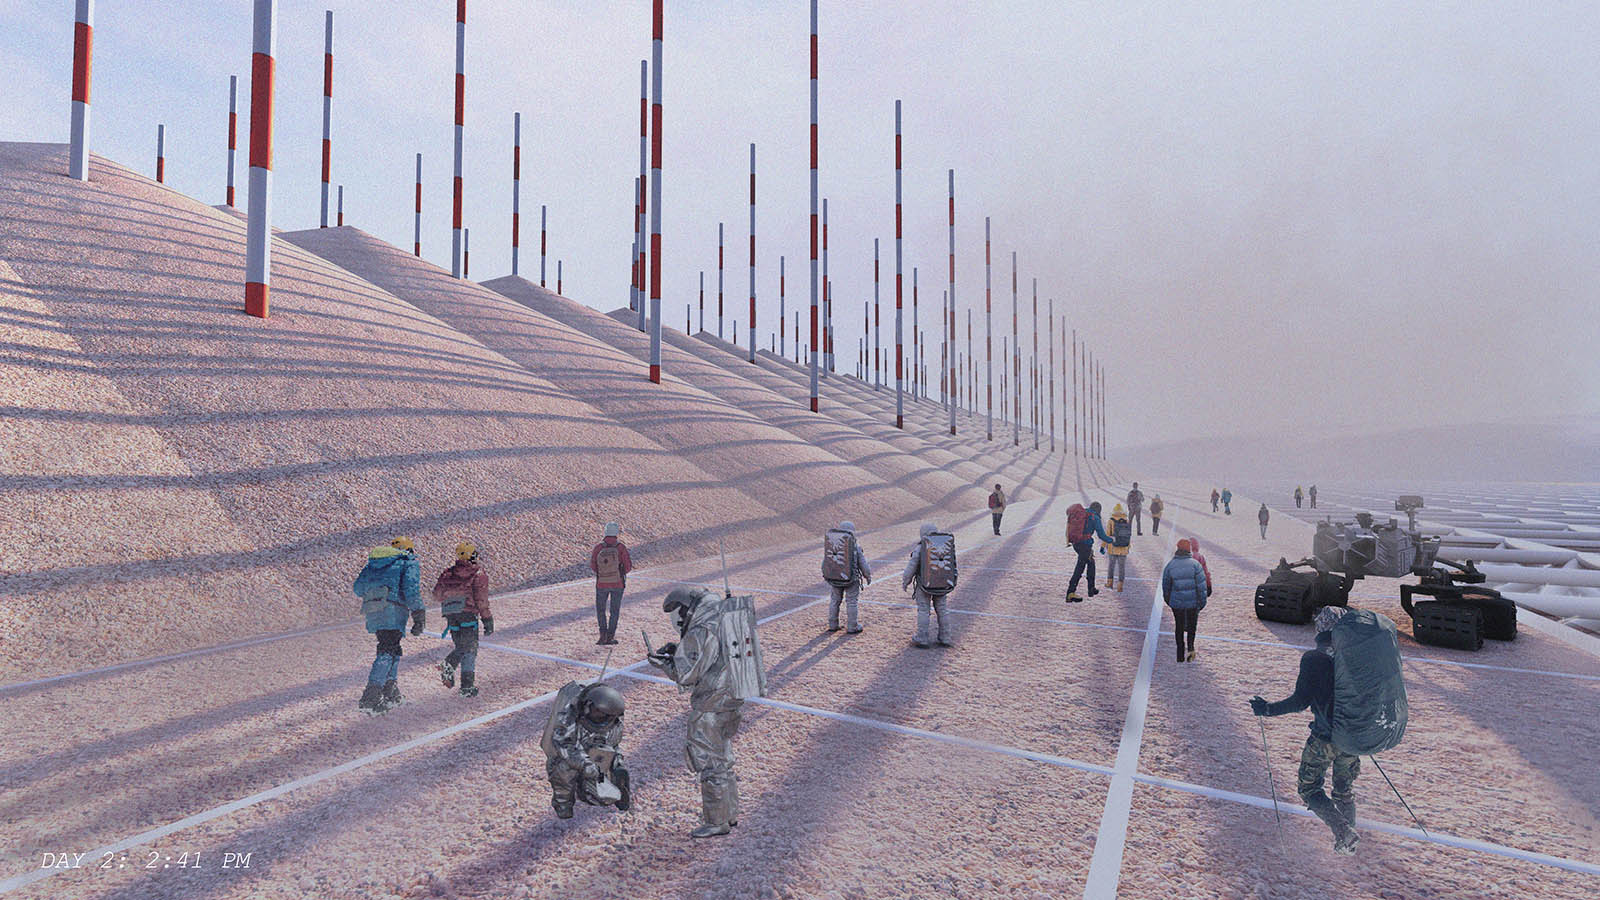 visualization of people in big backpacks and heavy gear walking around a tan landscape; white and red pole structures cover the landscape to the left